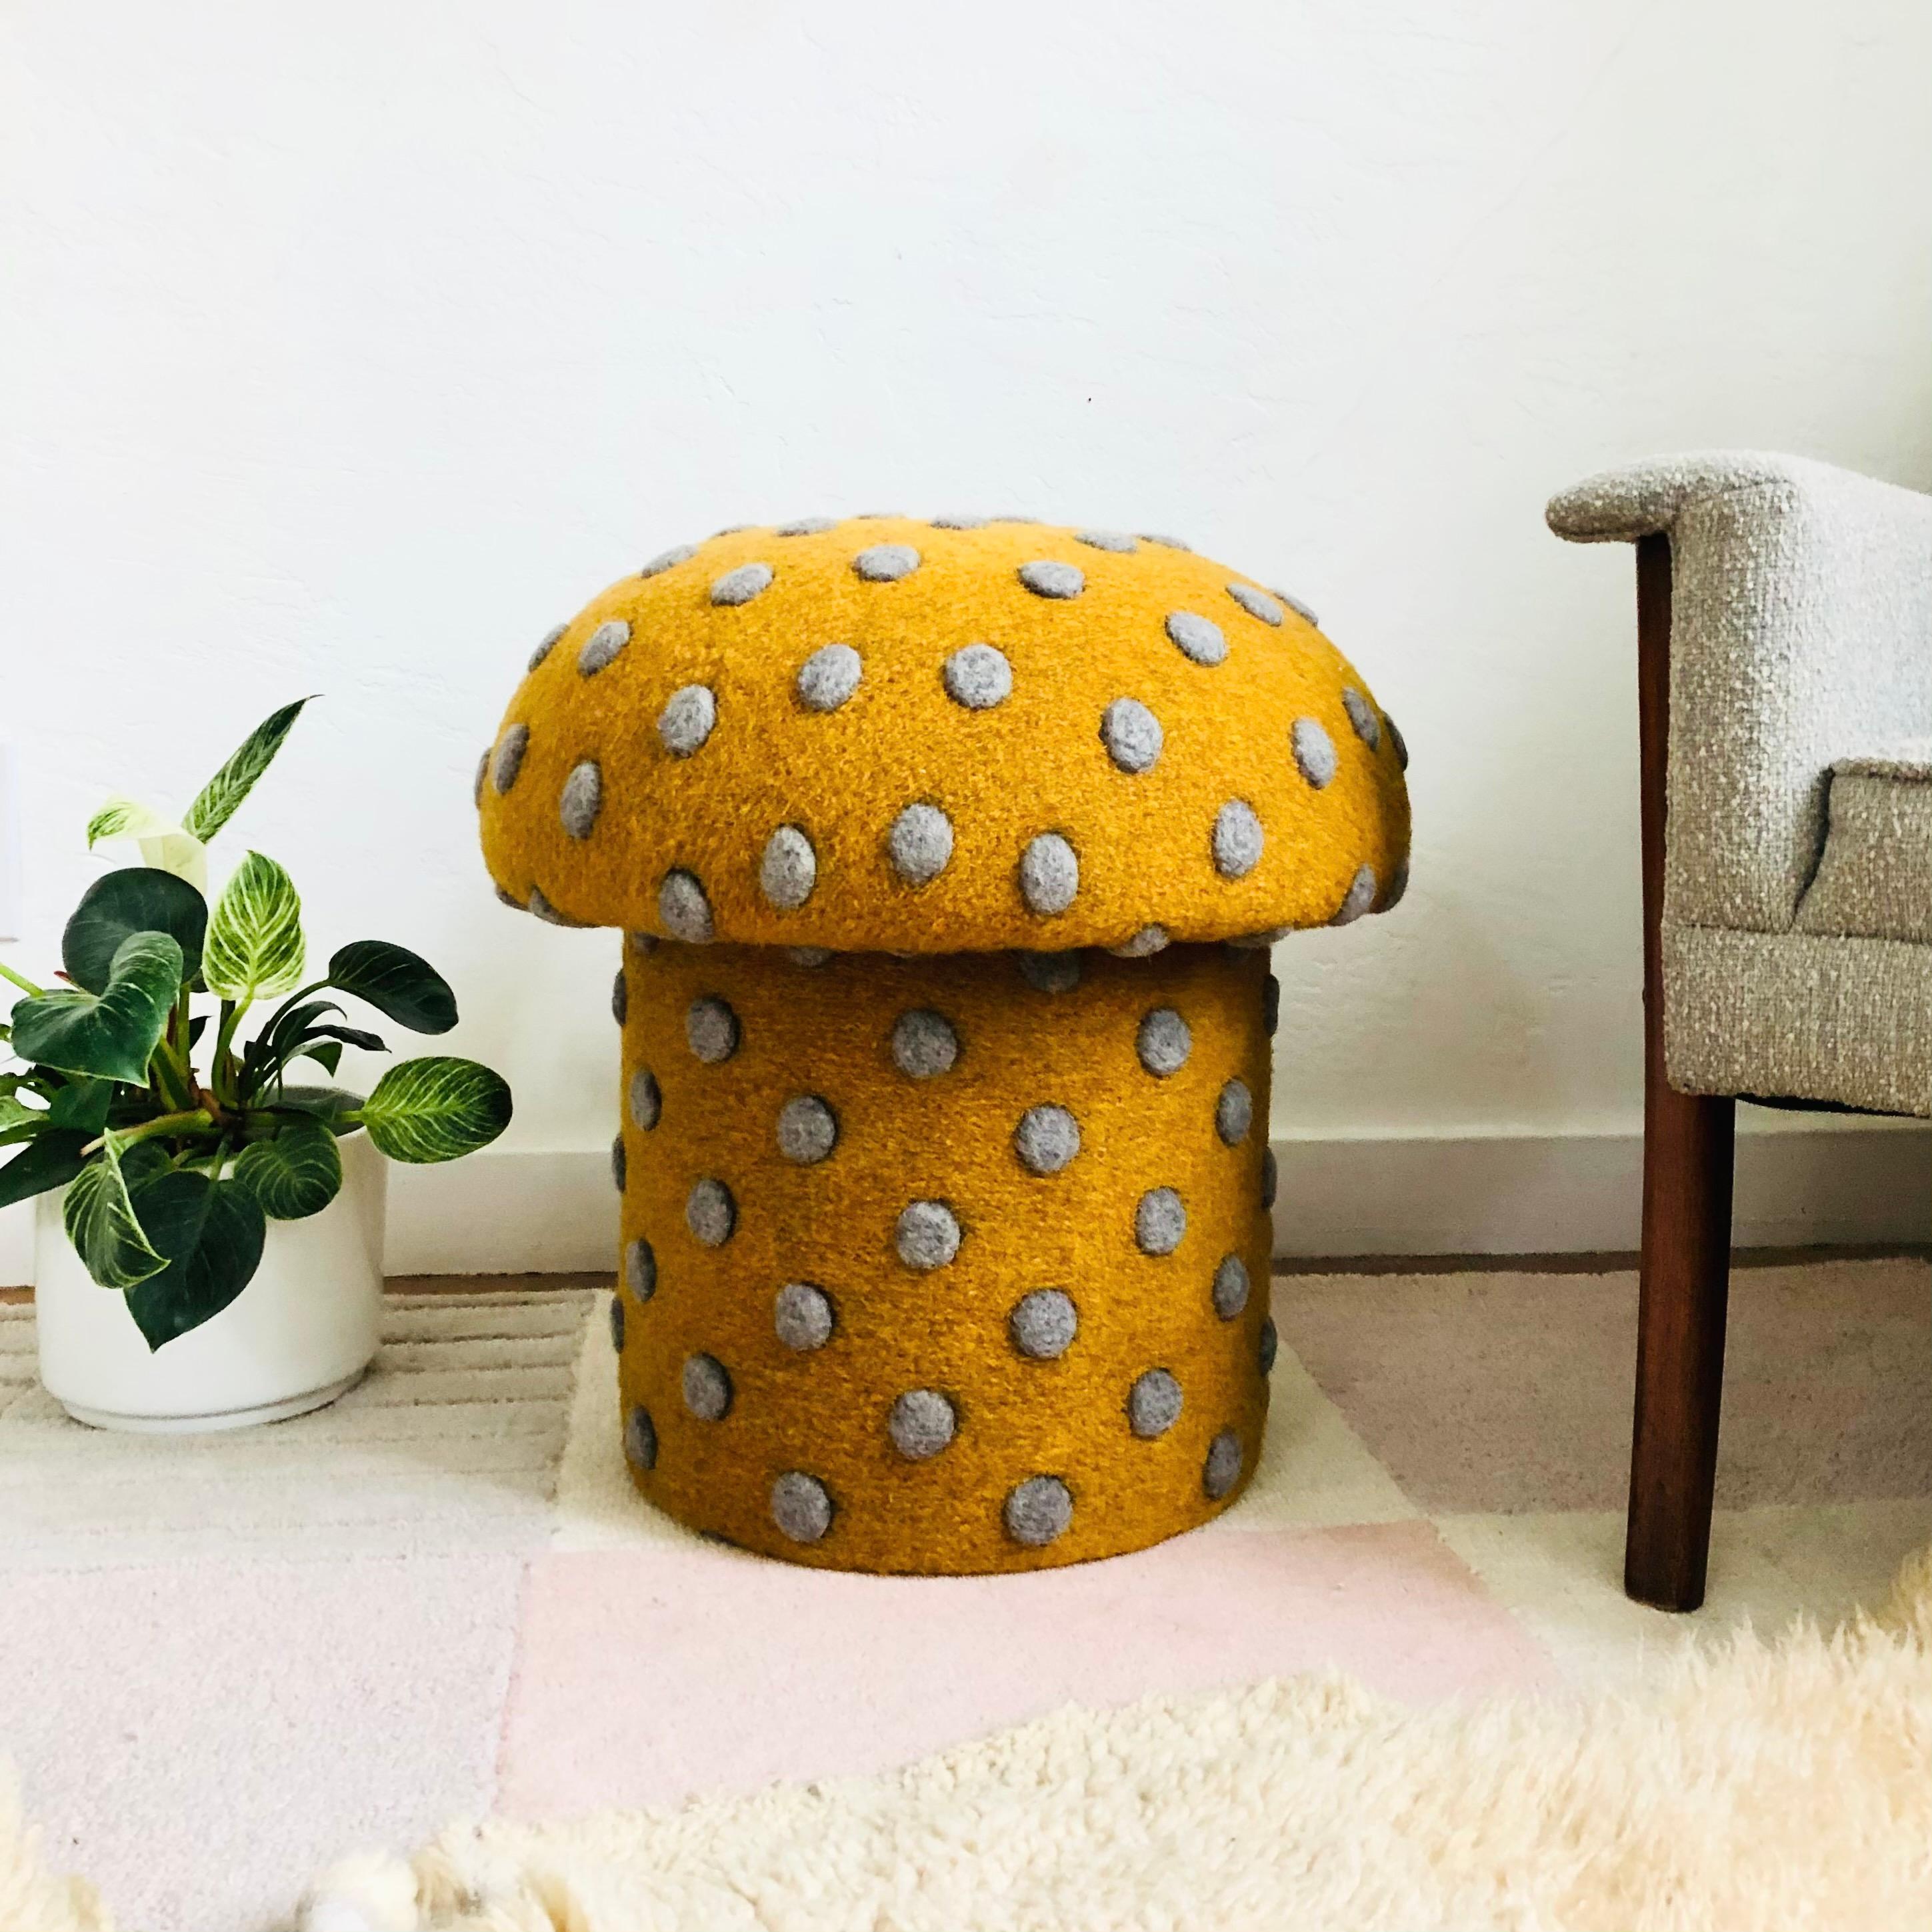 A handmade mushroom shaped ottoman, upholstered in a dotted wool blend fabric. Perfect for using as a footstool or extra occasional seating. A comfortable cushioned seat and sculptural accent piece. Fabric is an ochre color with large textured gray